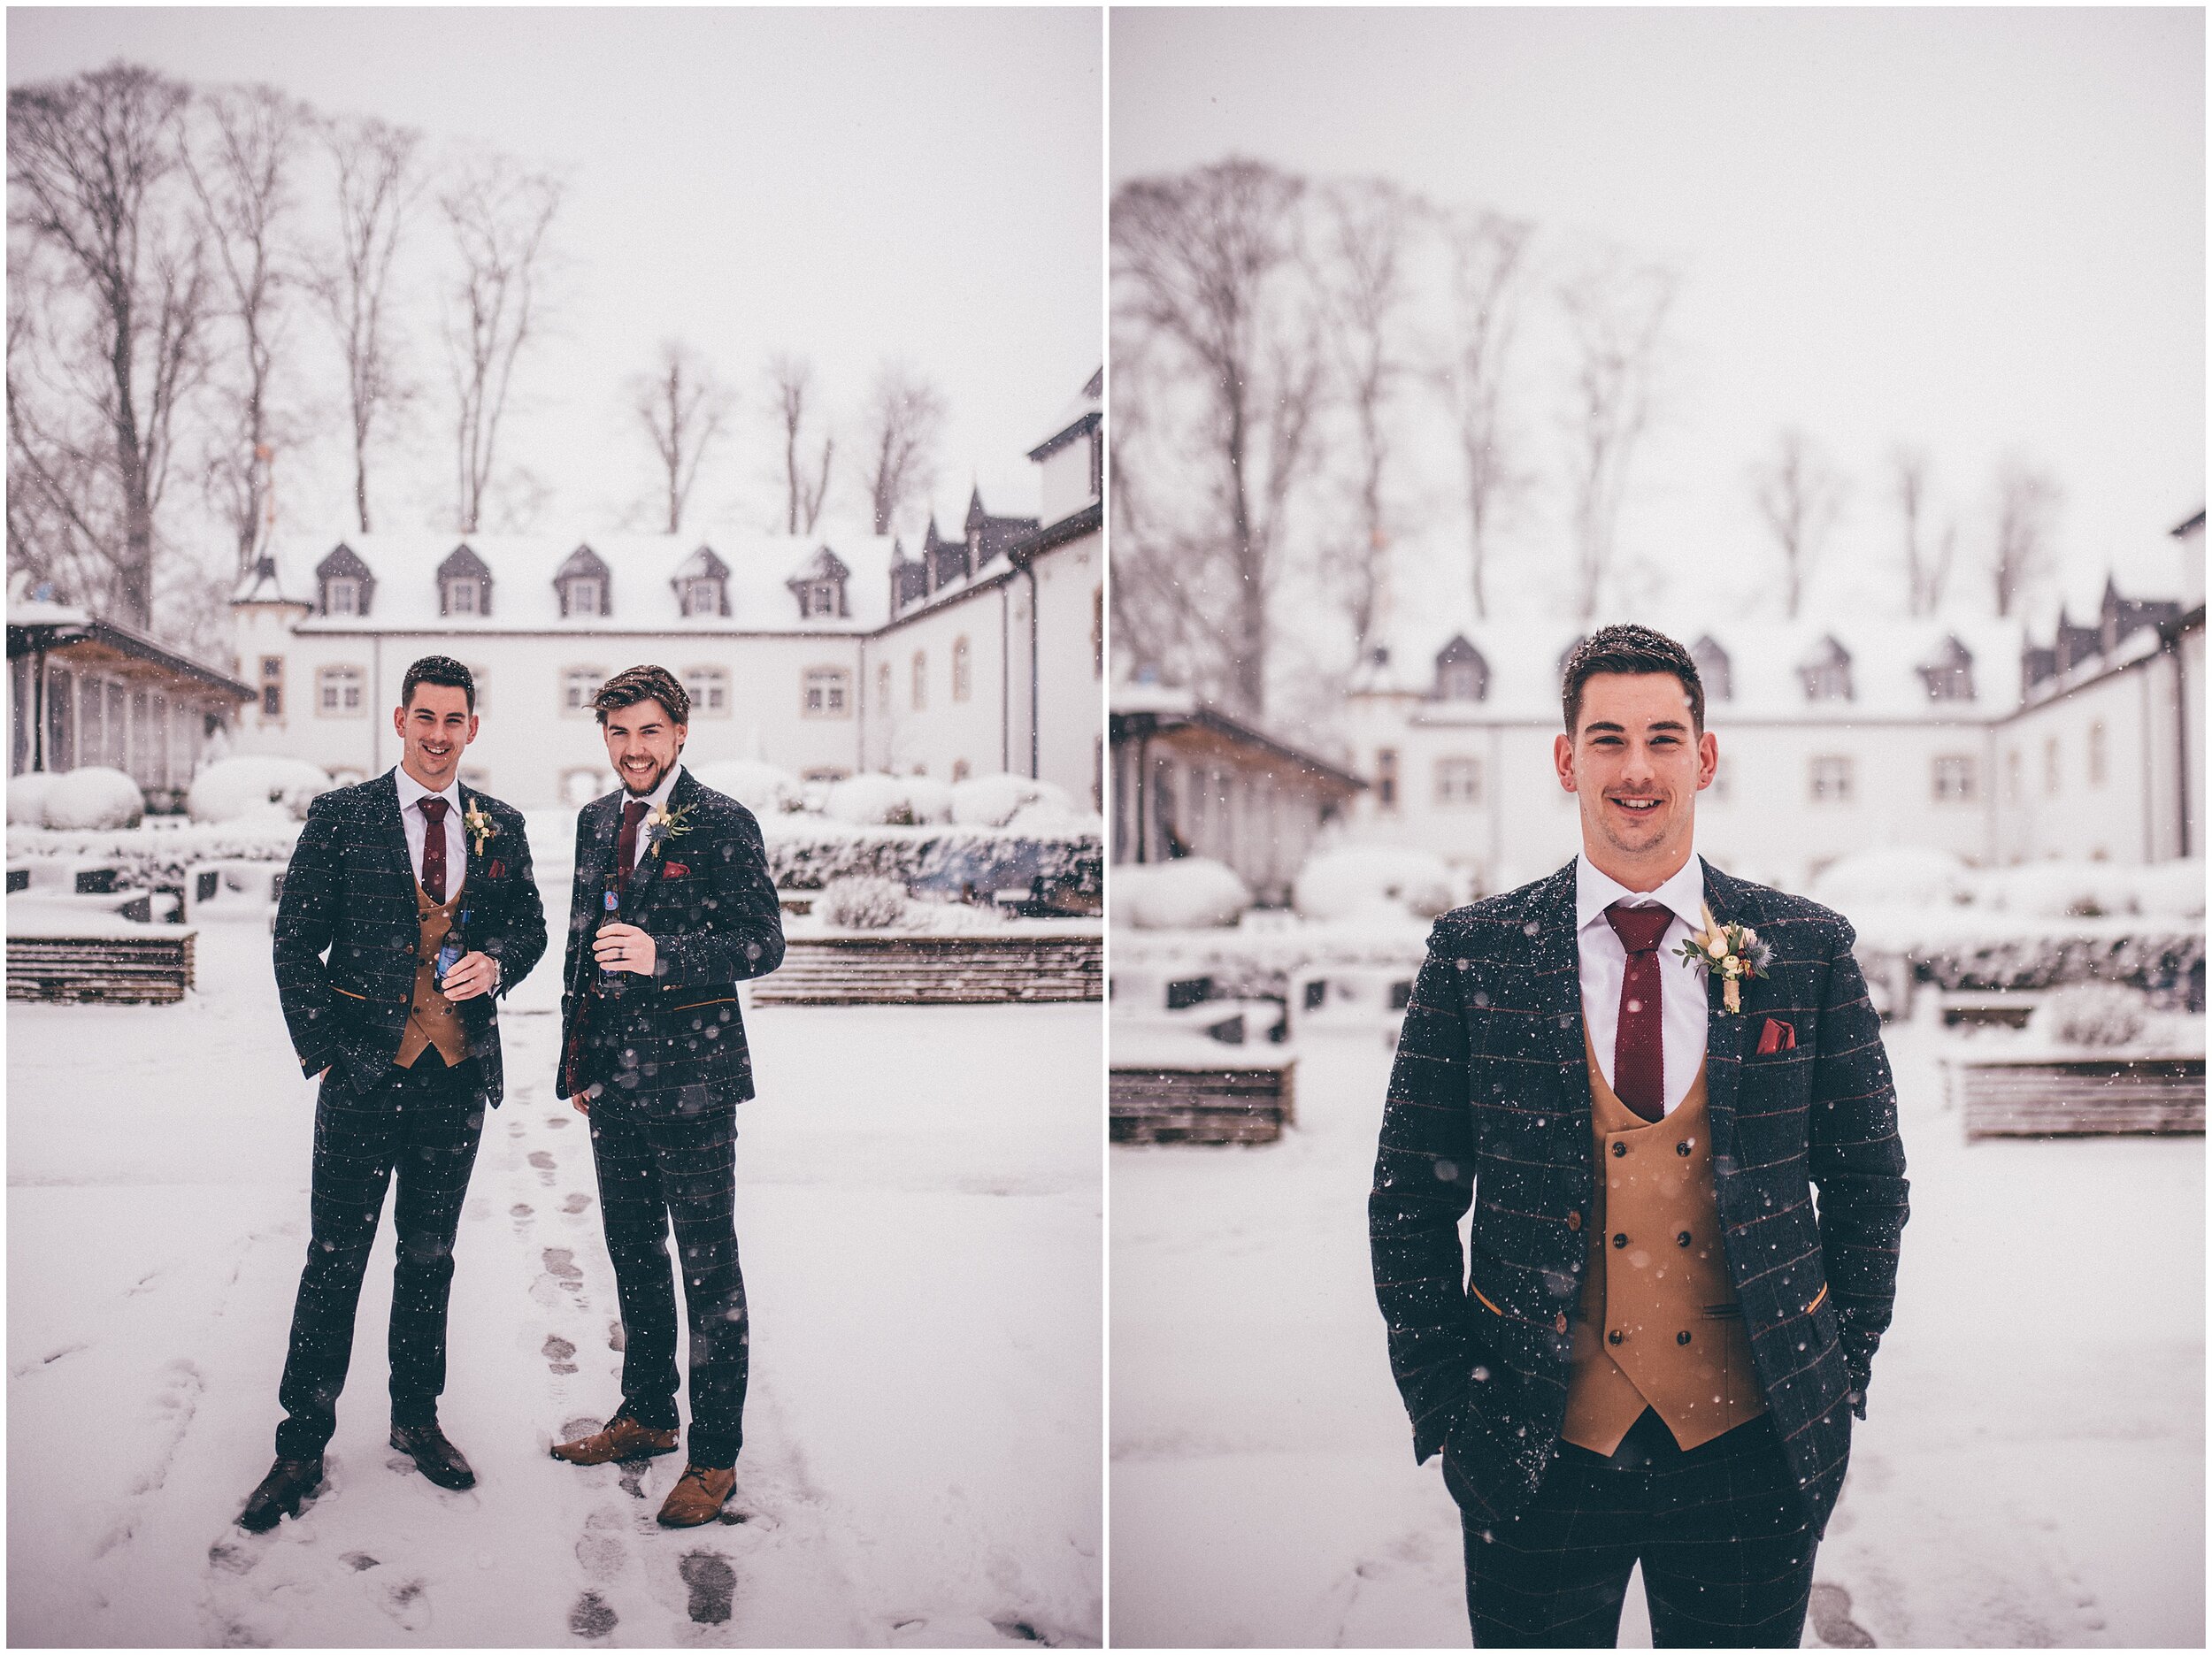 Groom and his Best Man have their photographs take in the snowy castle grounds.